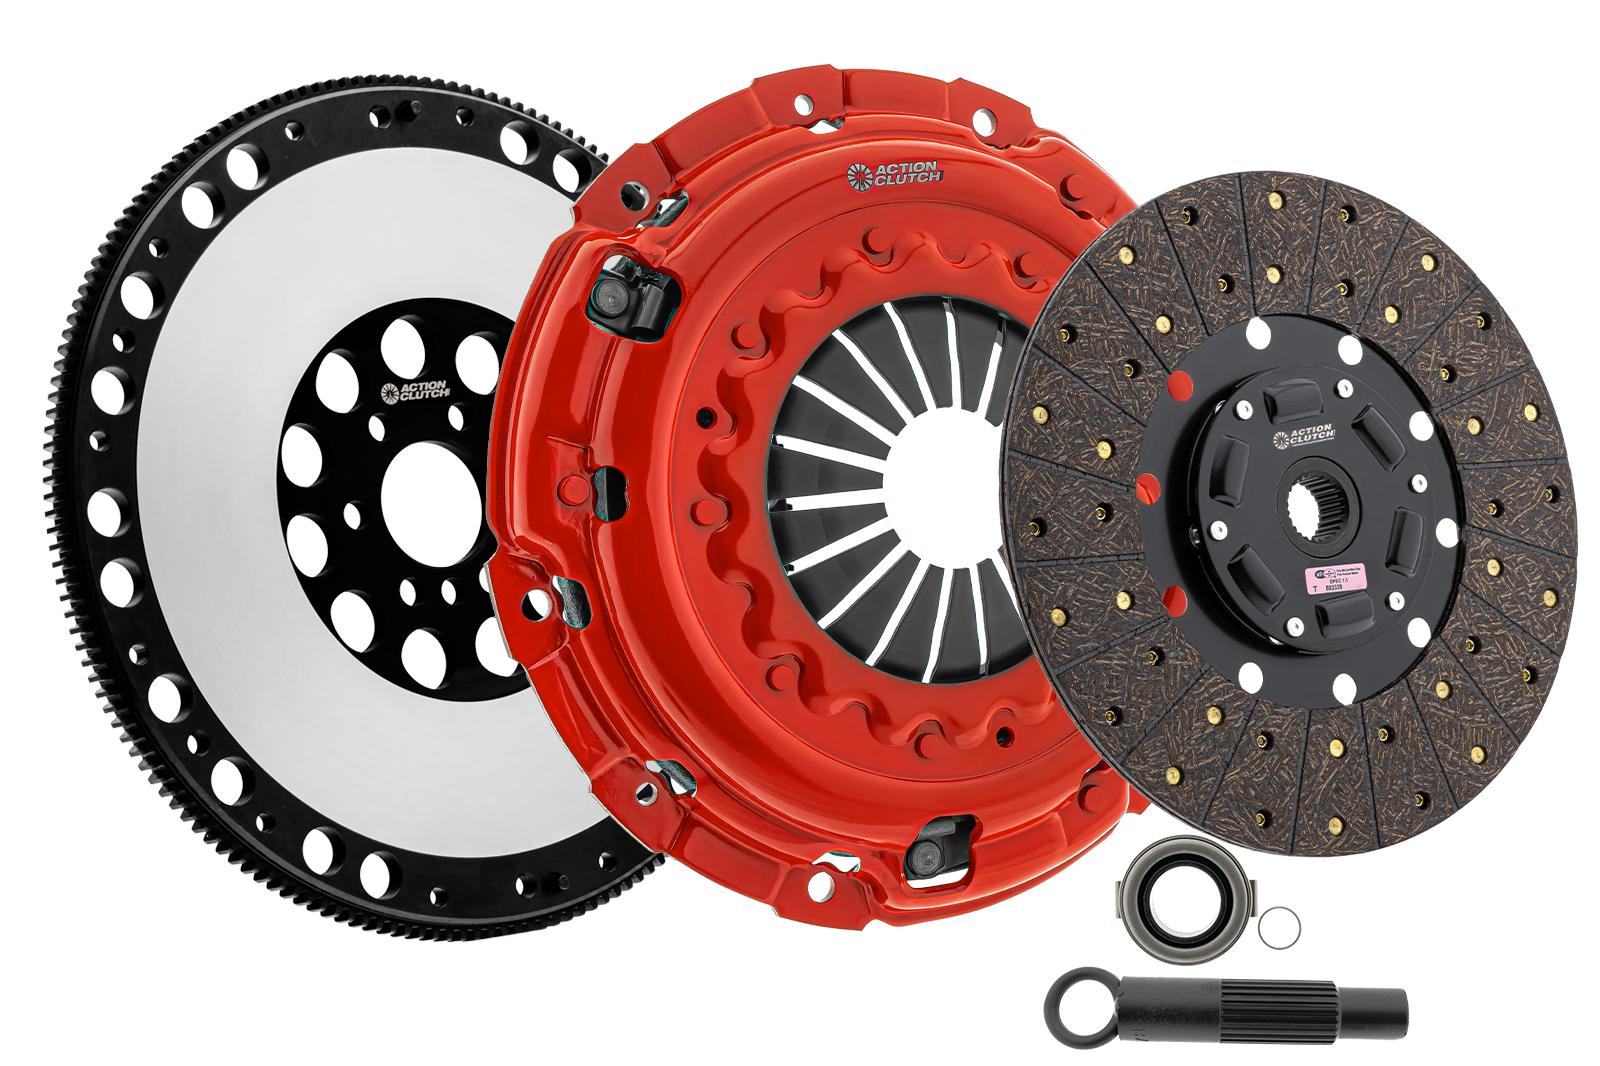 Stage 1 Clutch Kit (1OS) for BMW 328i 1999-2000 2.8L DOHC 4 Door Only RWD Includes Lightened Flywheel